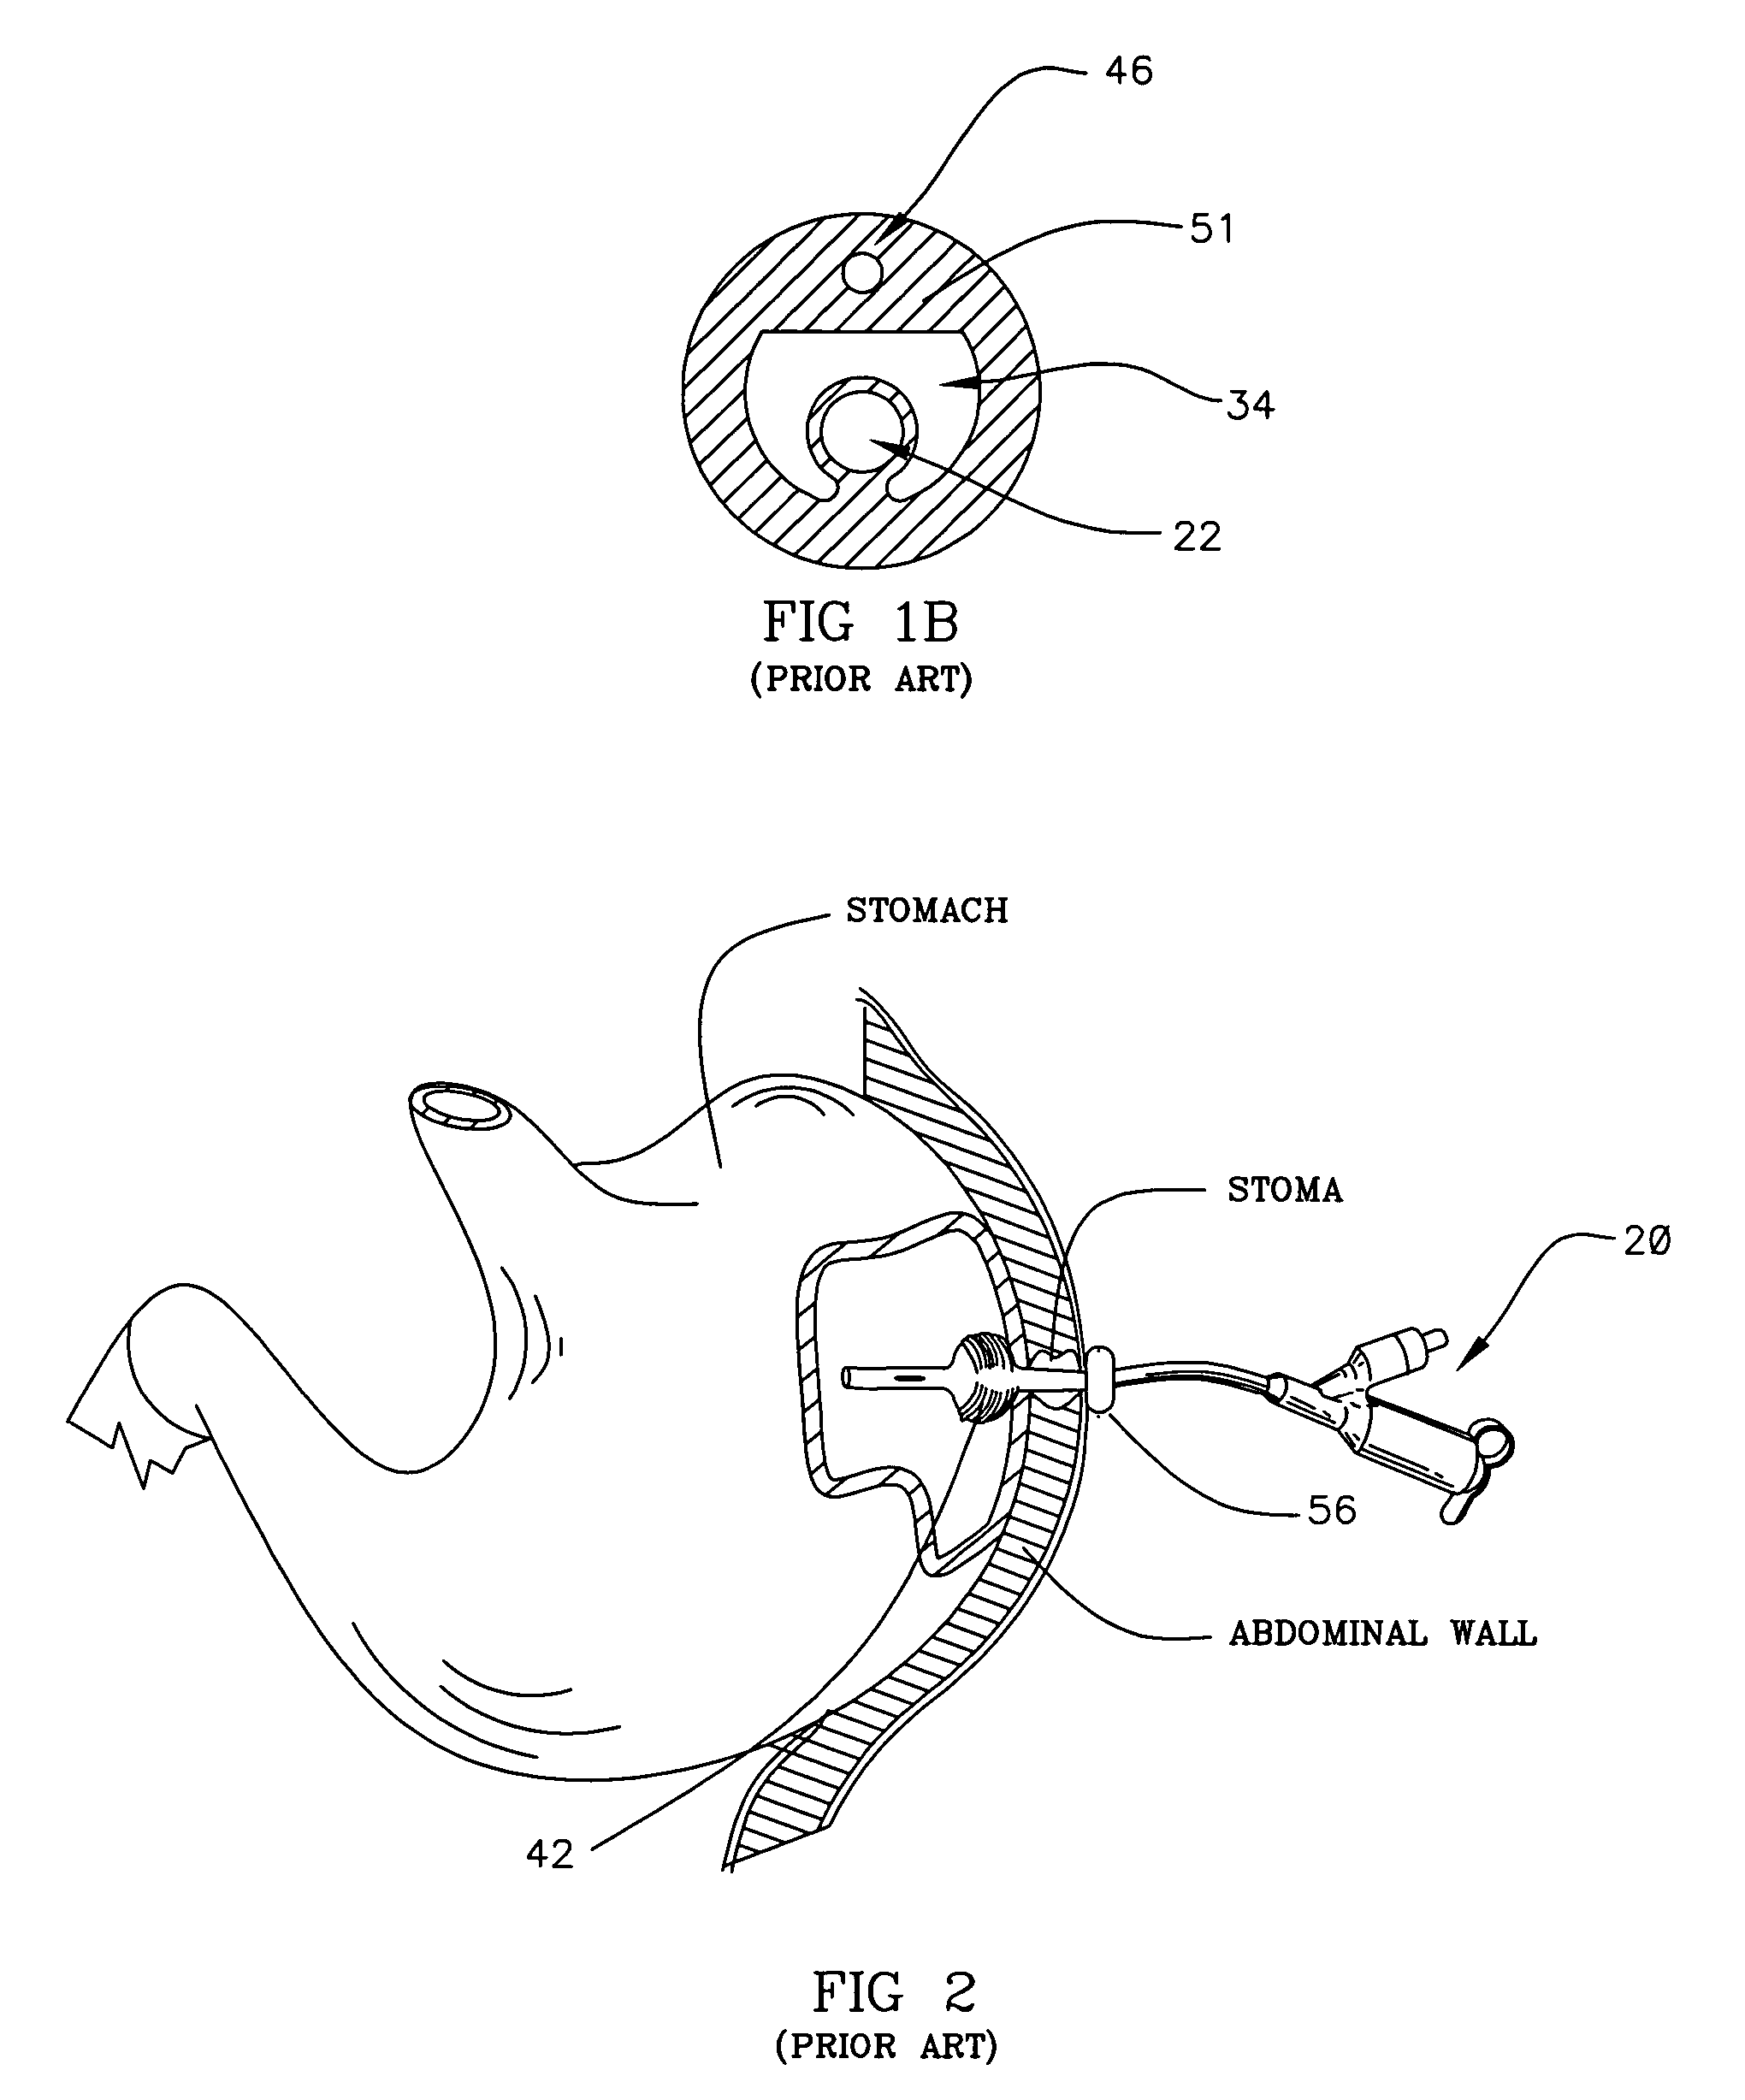 Retention device for medical components